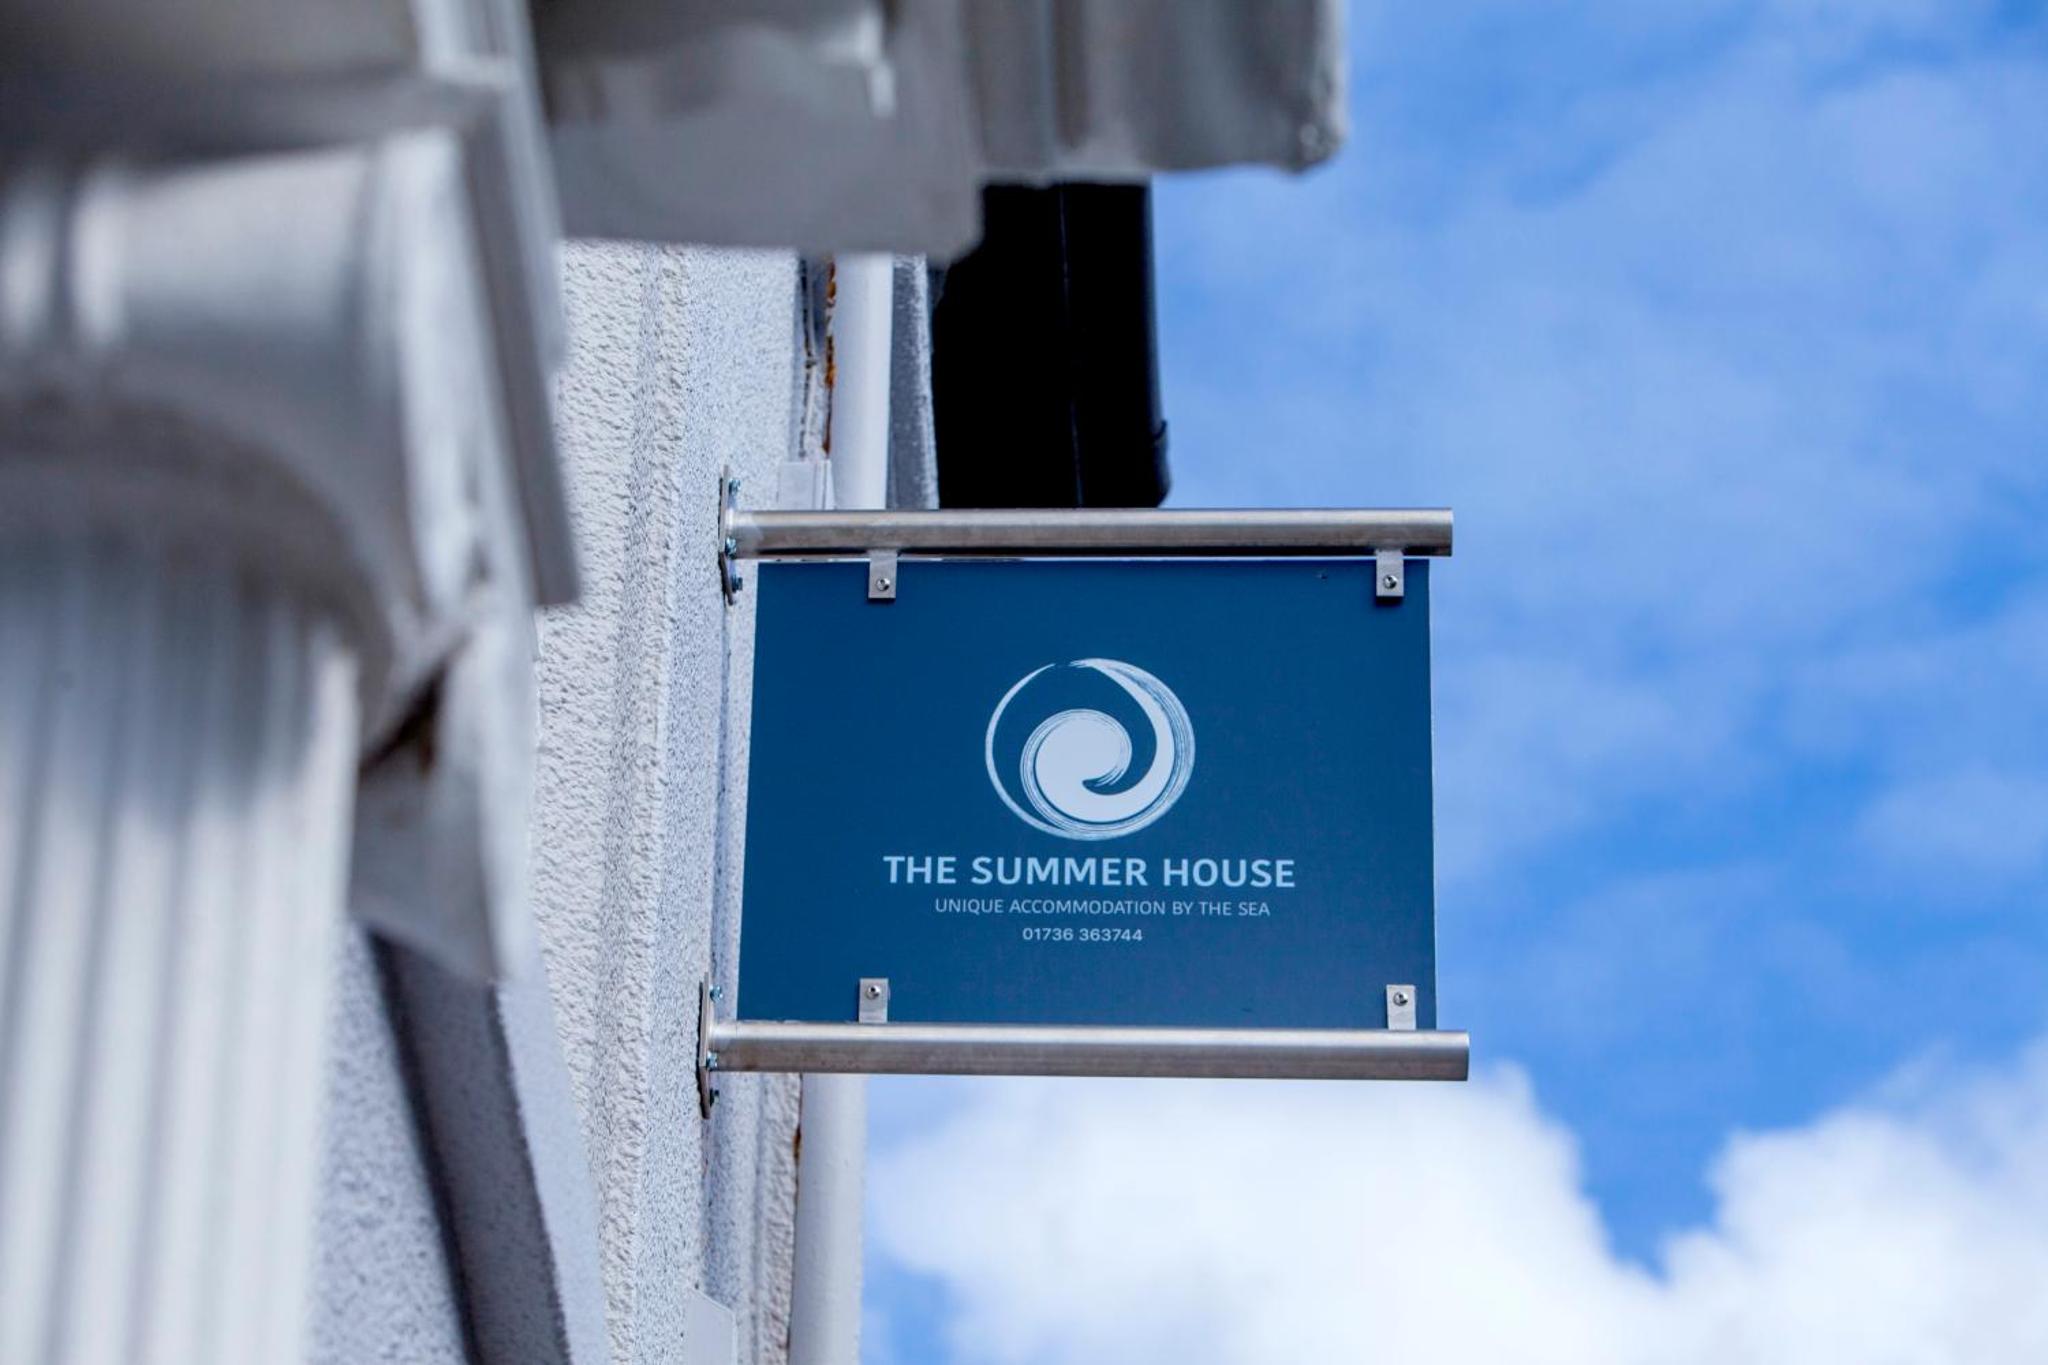 The Summer House Hotel